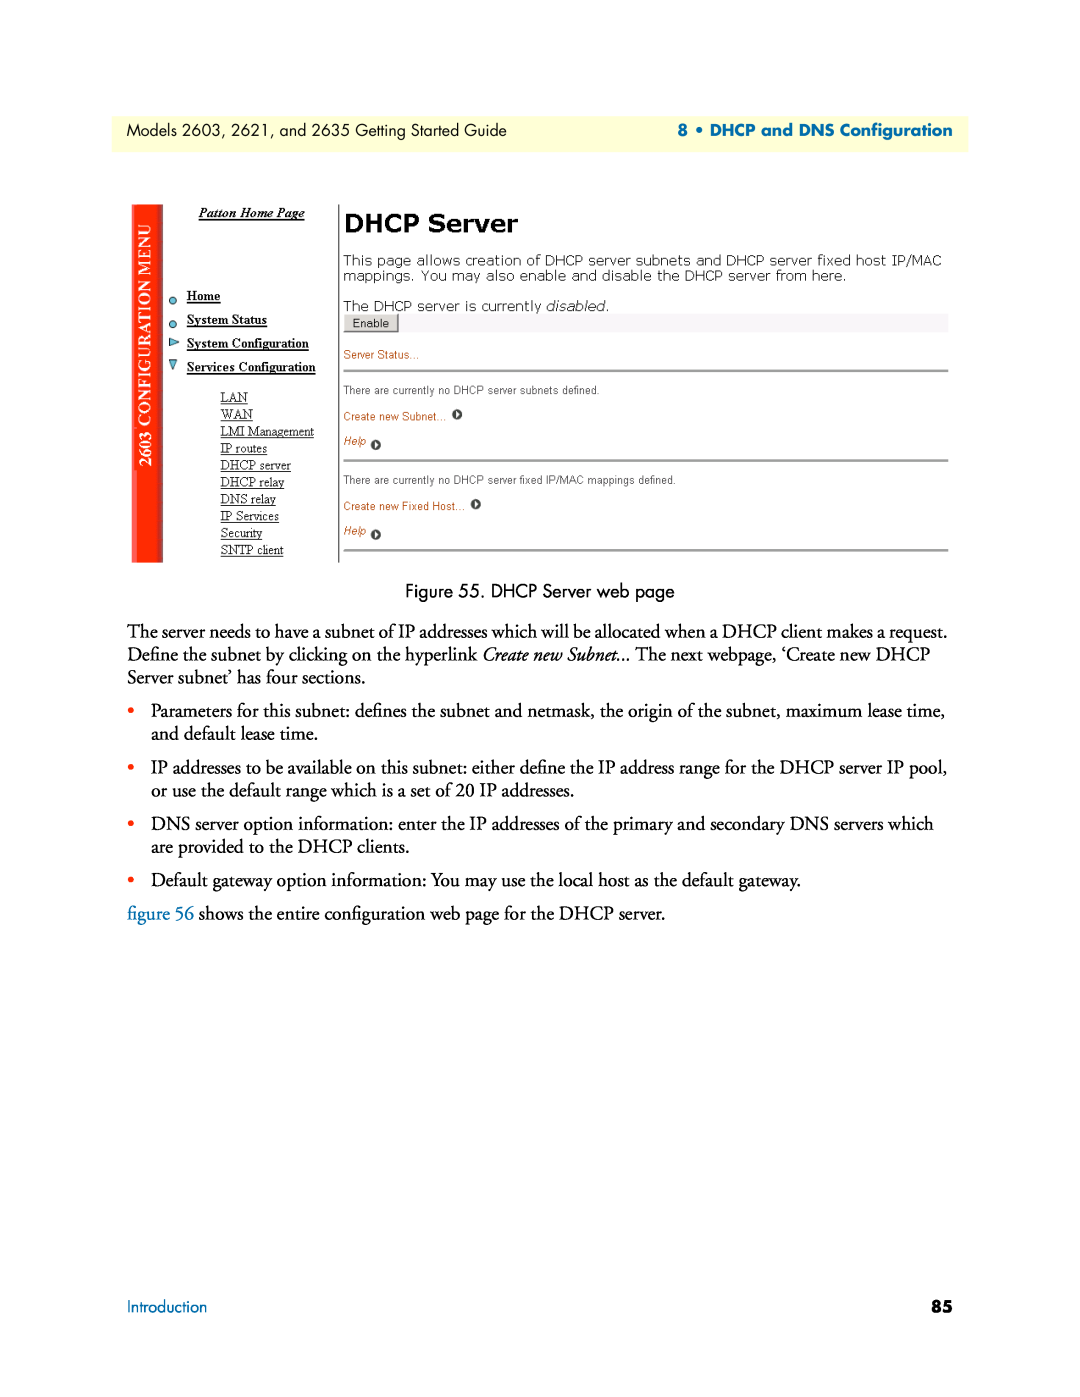 Patton electronic 2635, 2621 manual ﬁgure 56 shows the entire conﬁguration web page for the DHCP server 